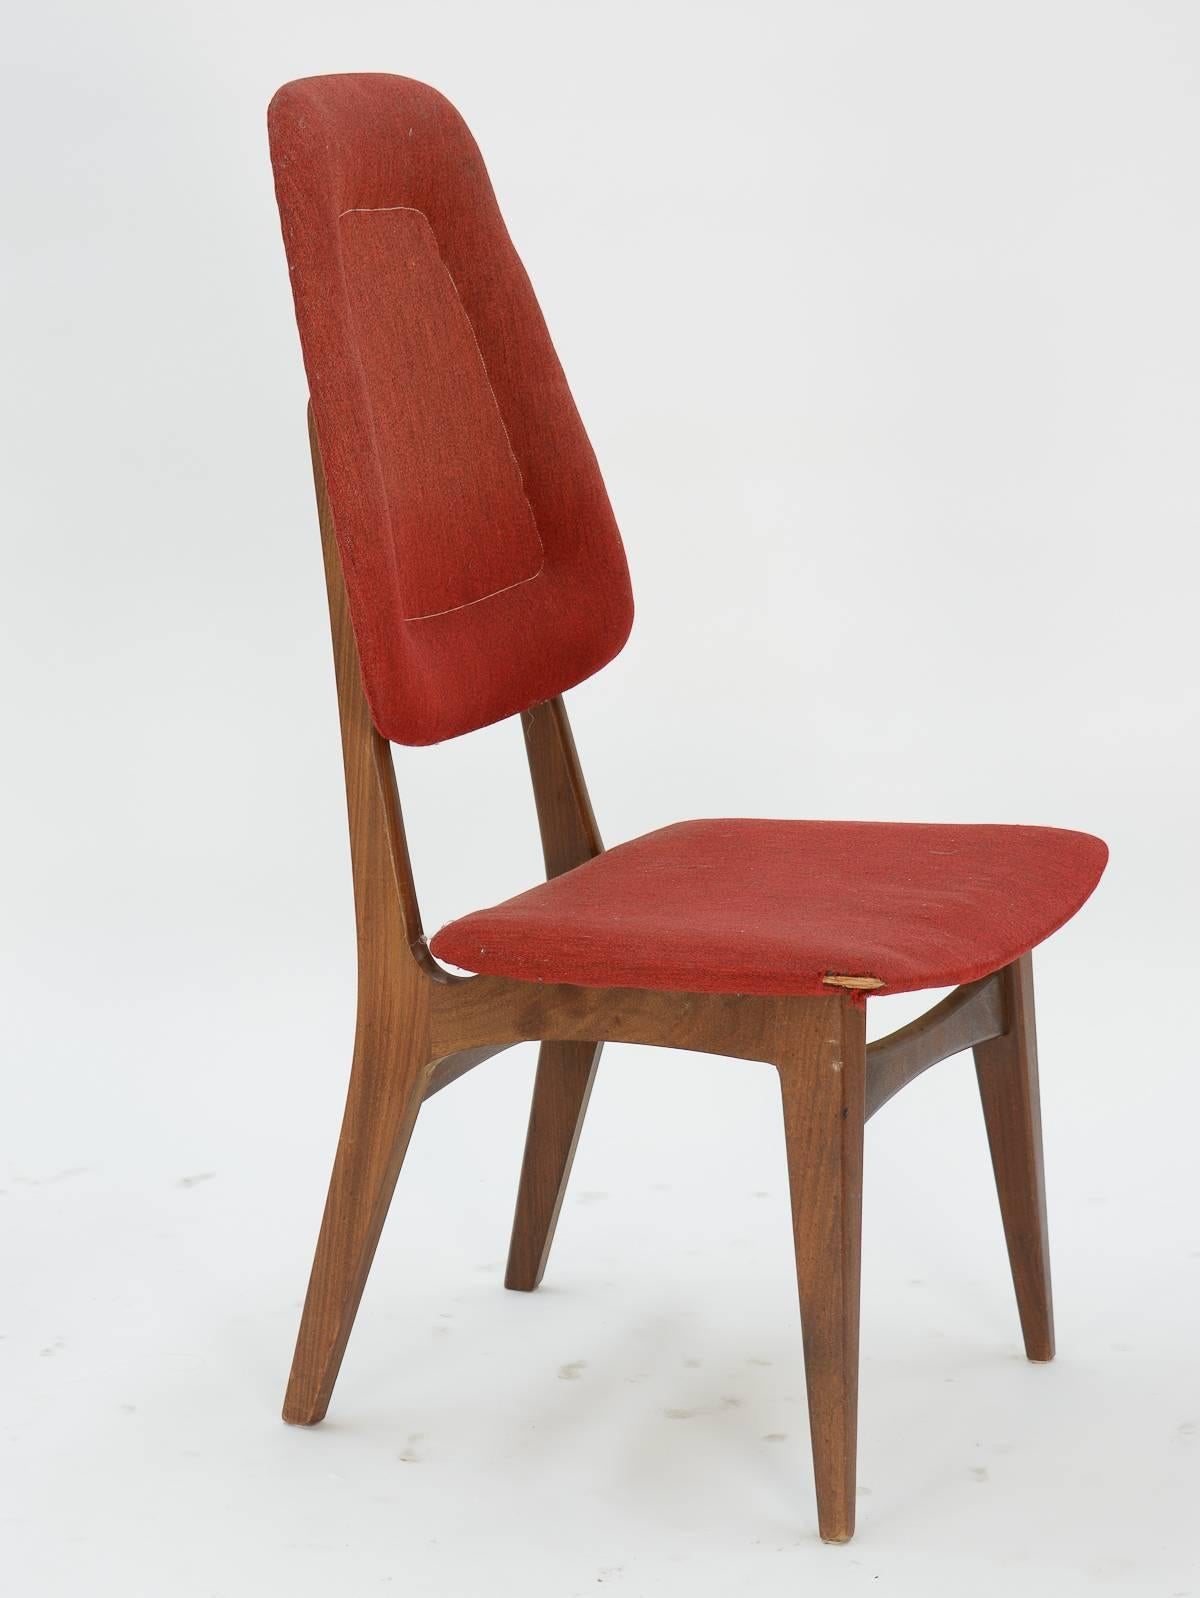 Up to 10 Sorheim Bruk High Back Dining Chairs with Walnut Frames 1960 In Good Condition For Sale In Portland, OR